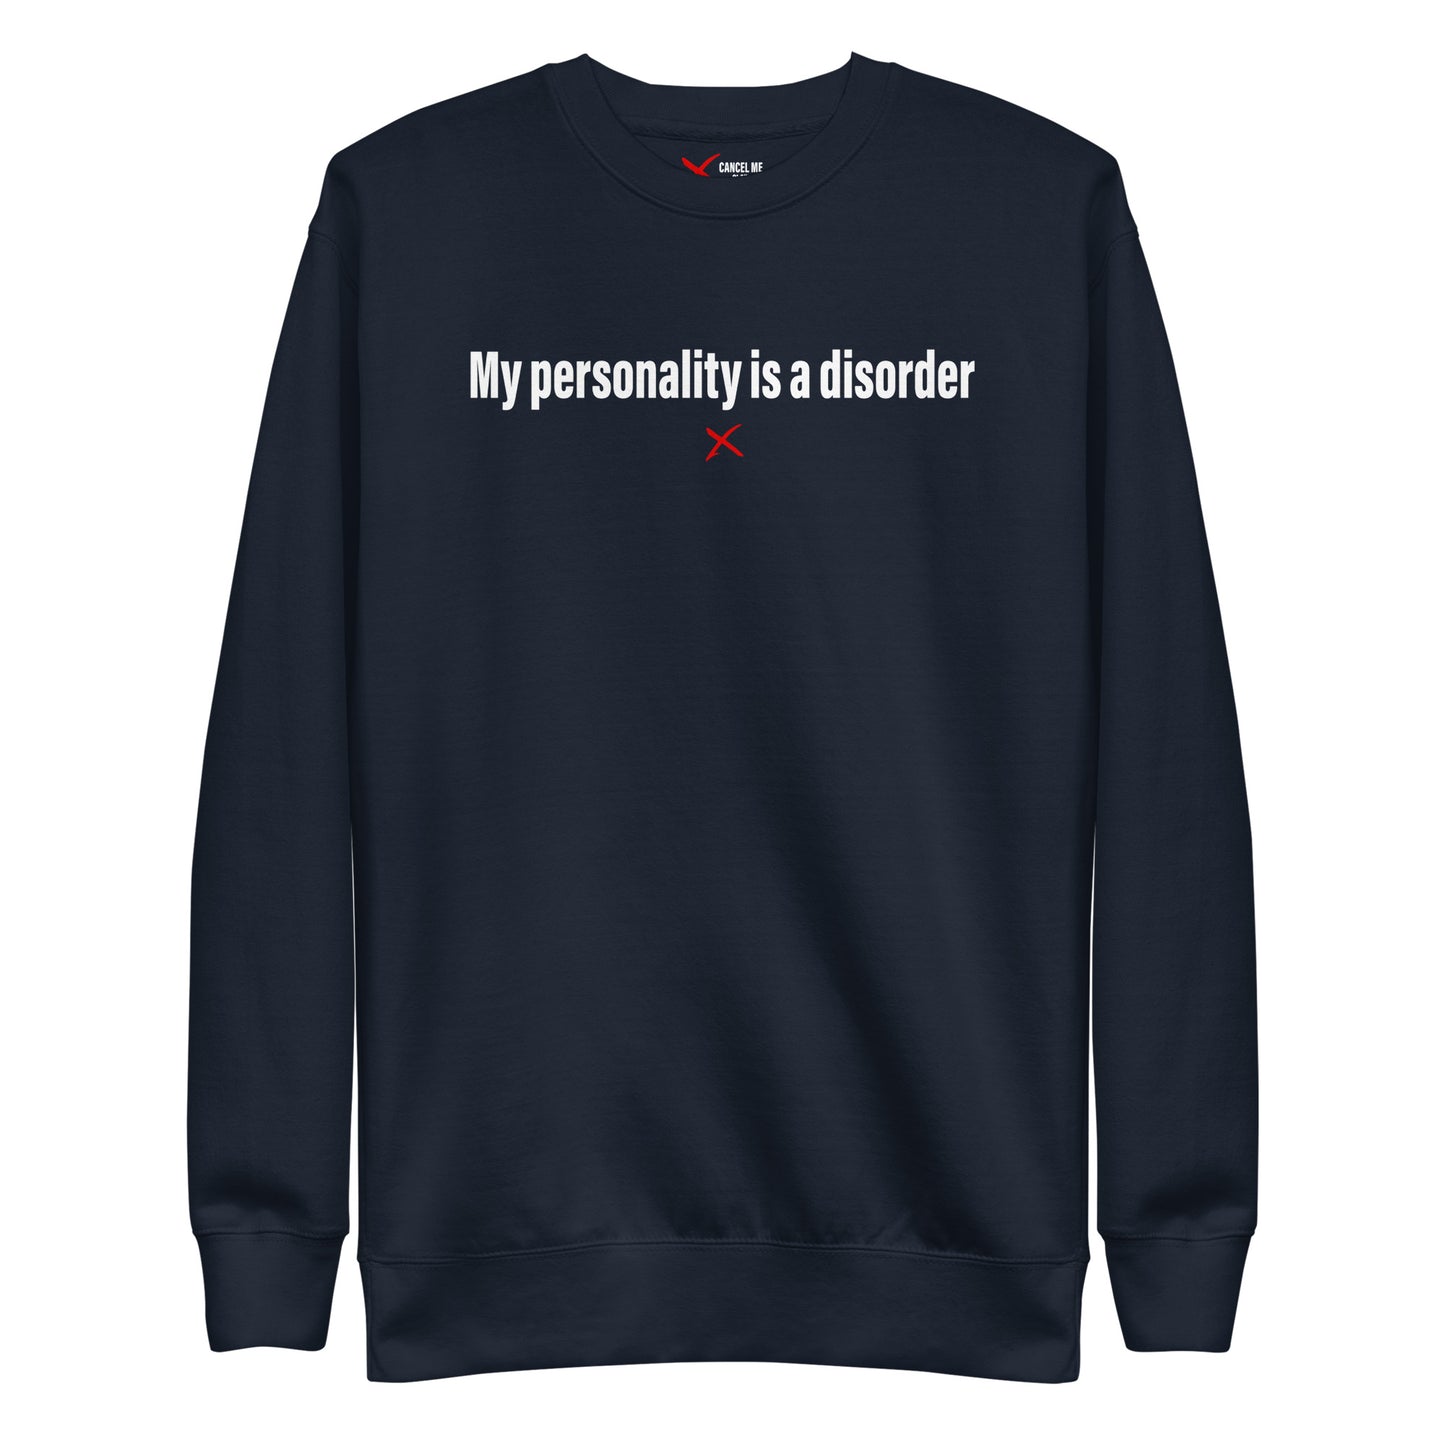 My personality is a disorder - Sweatshirt